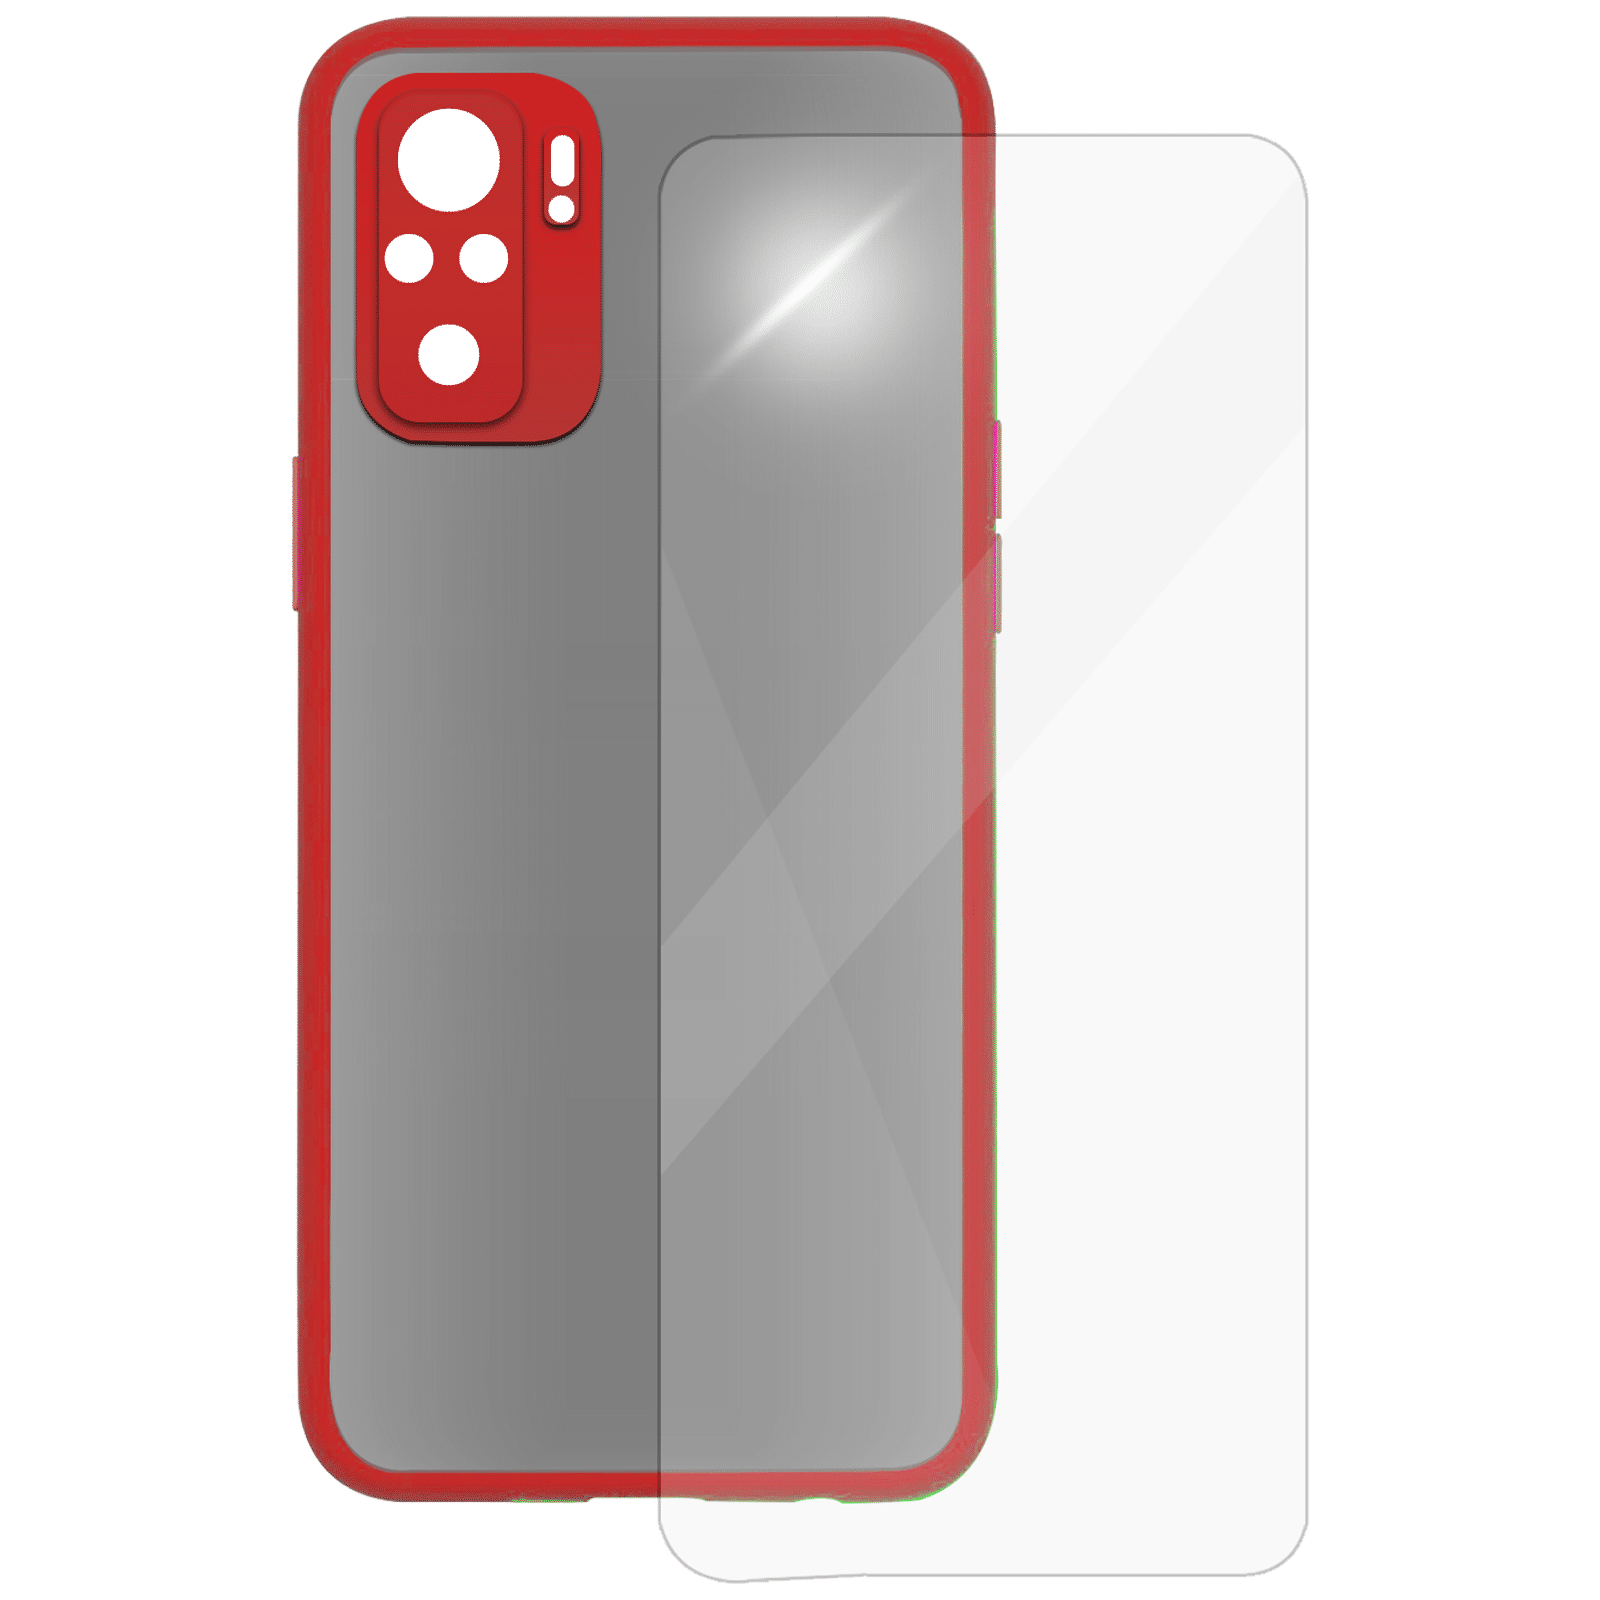 Buy Arrow Camera Duplex Screen Protector And Polycarbonate Back Cover Combo For Xiaomi Mi Note 10 0690